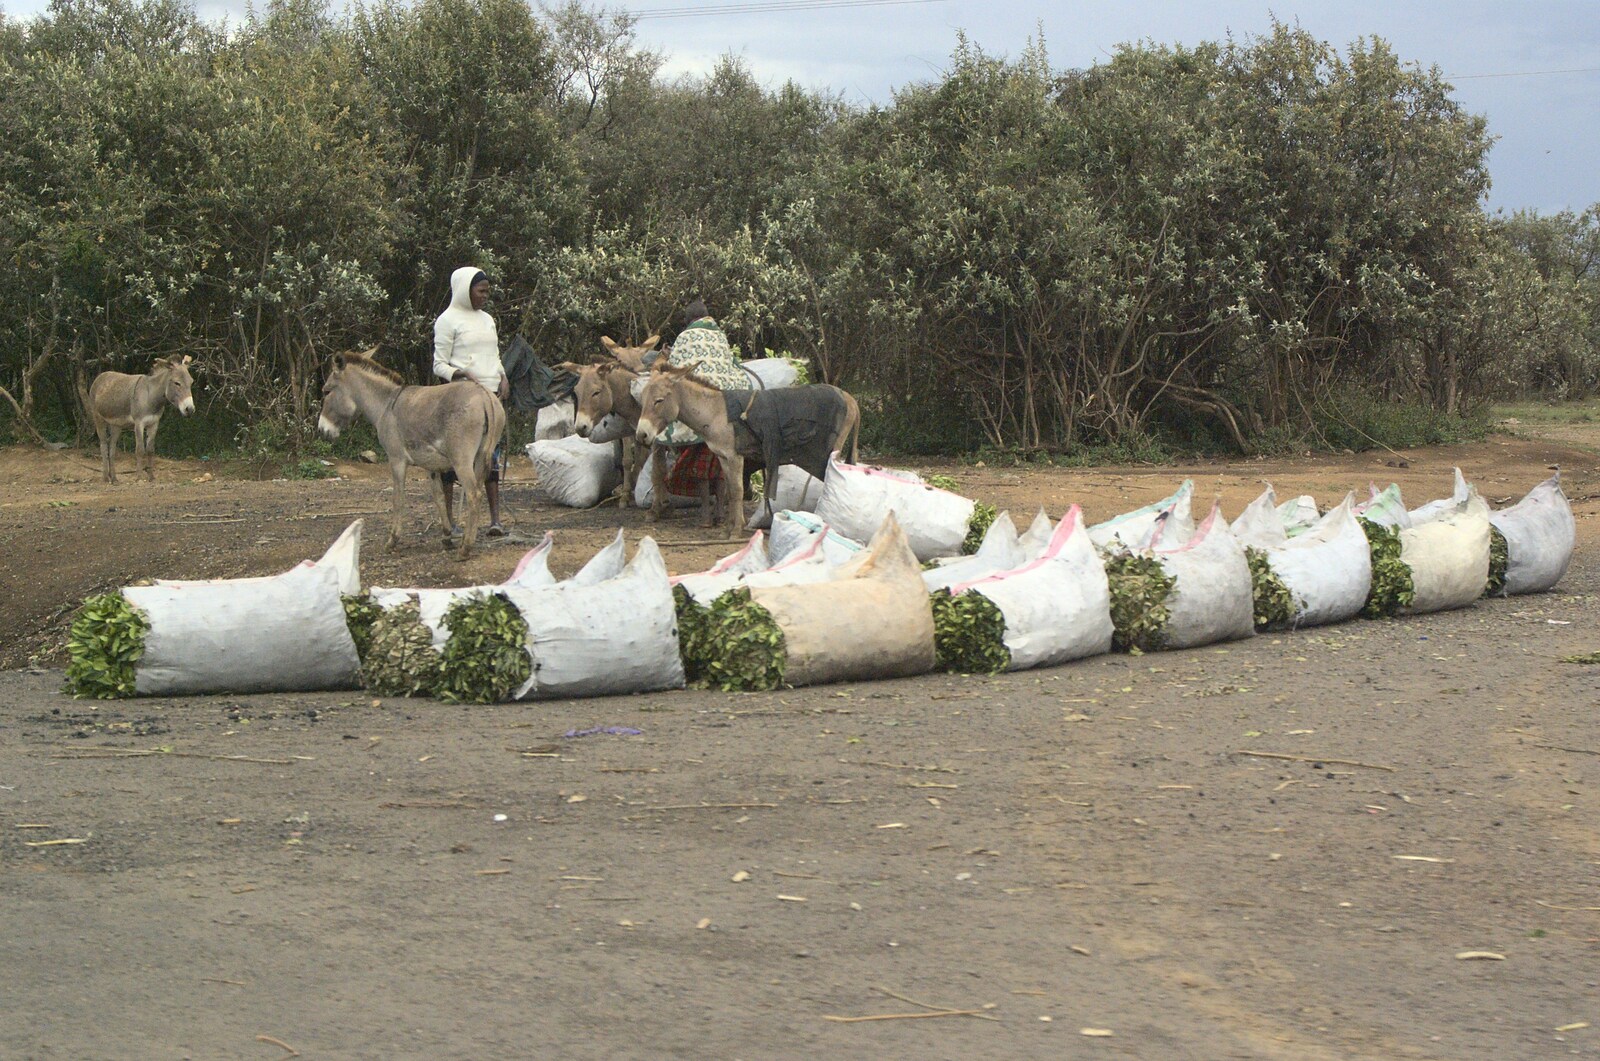 Wood for charcoal is sold by the roadside from Nairobi and the Road to Maasai Mara, Kenya, Africa - 1st November 2010